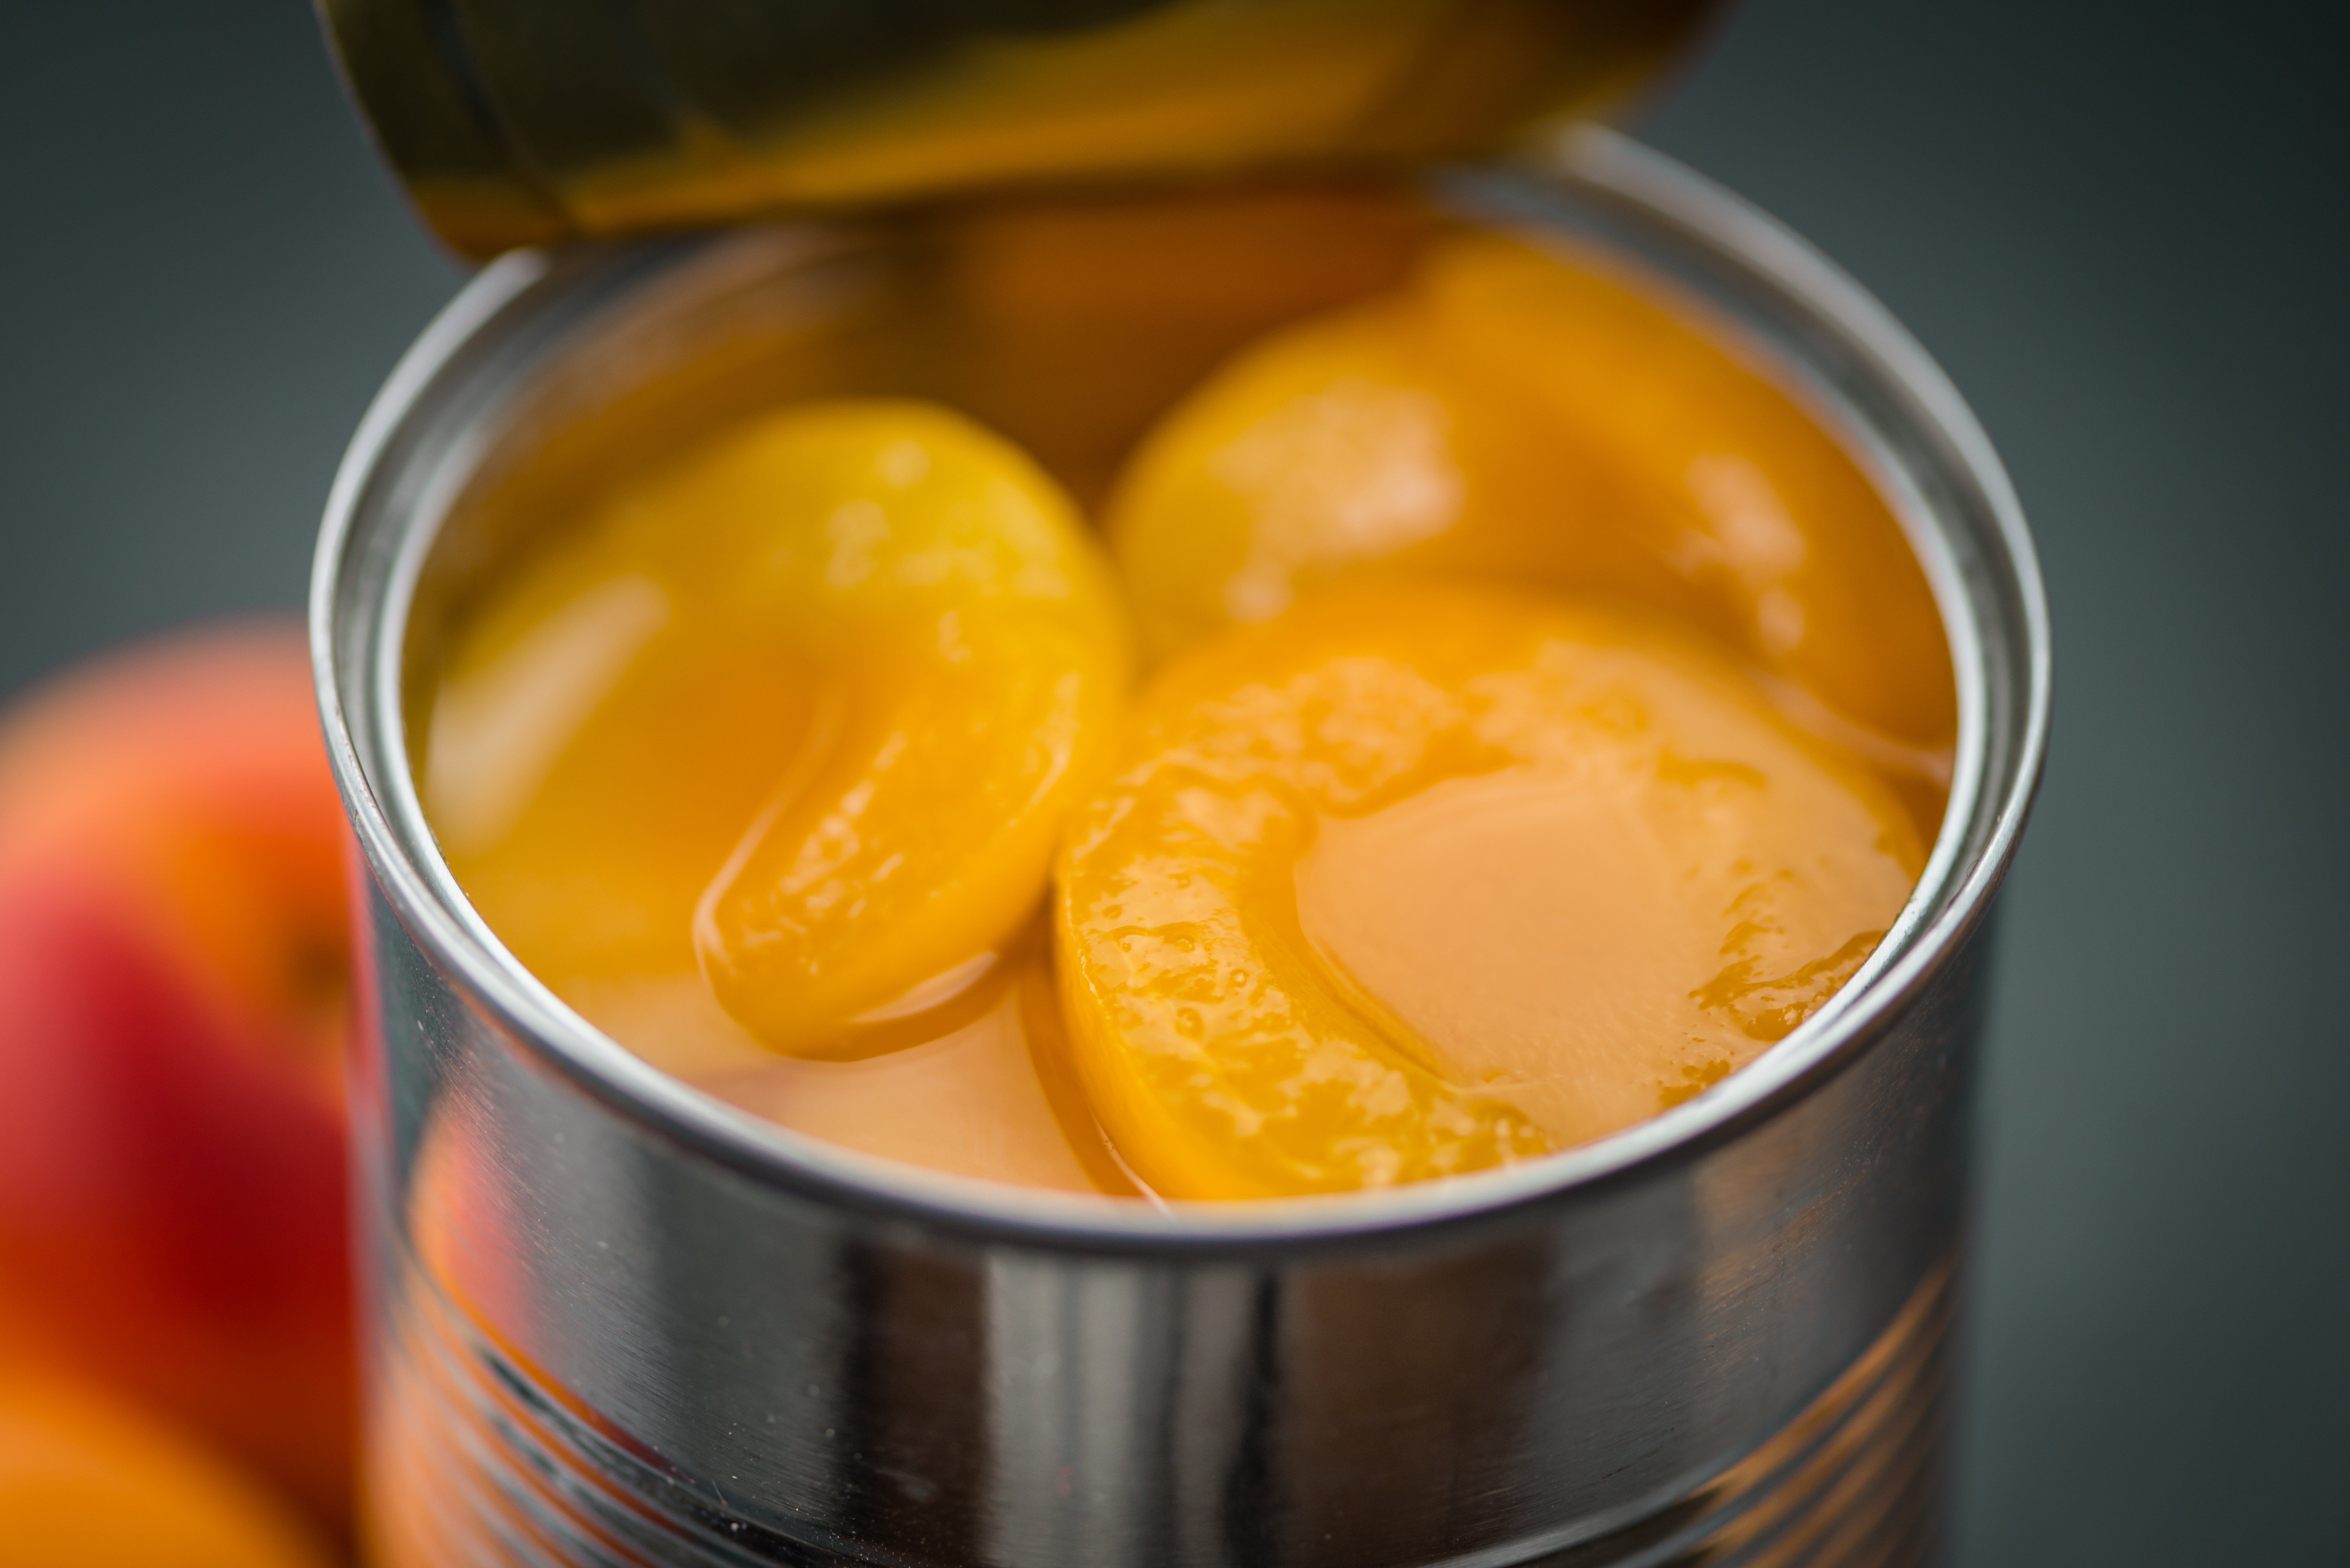 A can of peaches. Image credit: Shutterstock